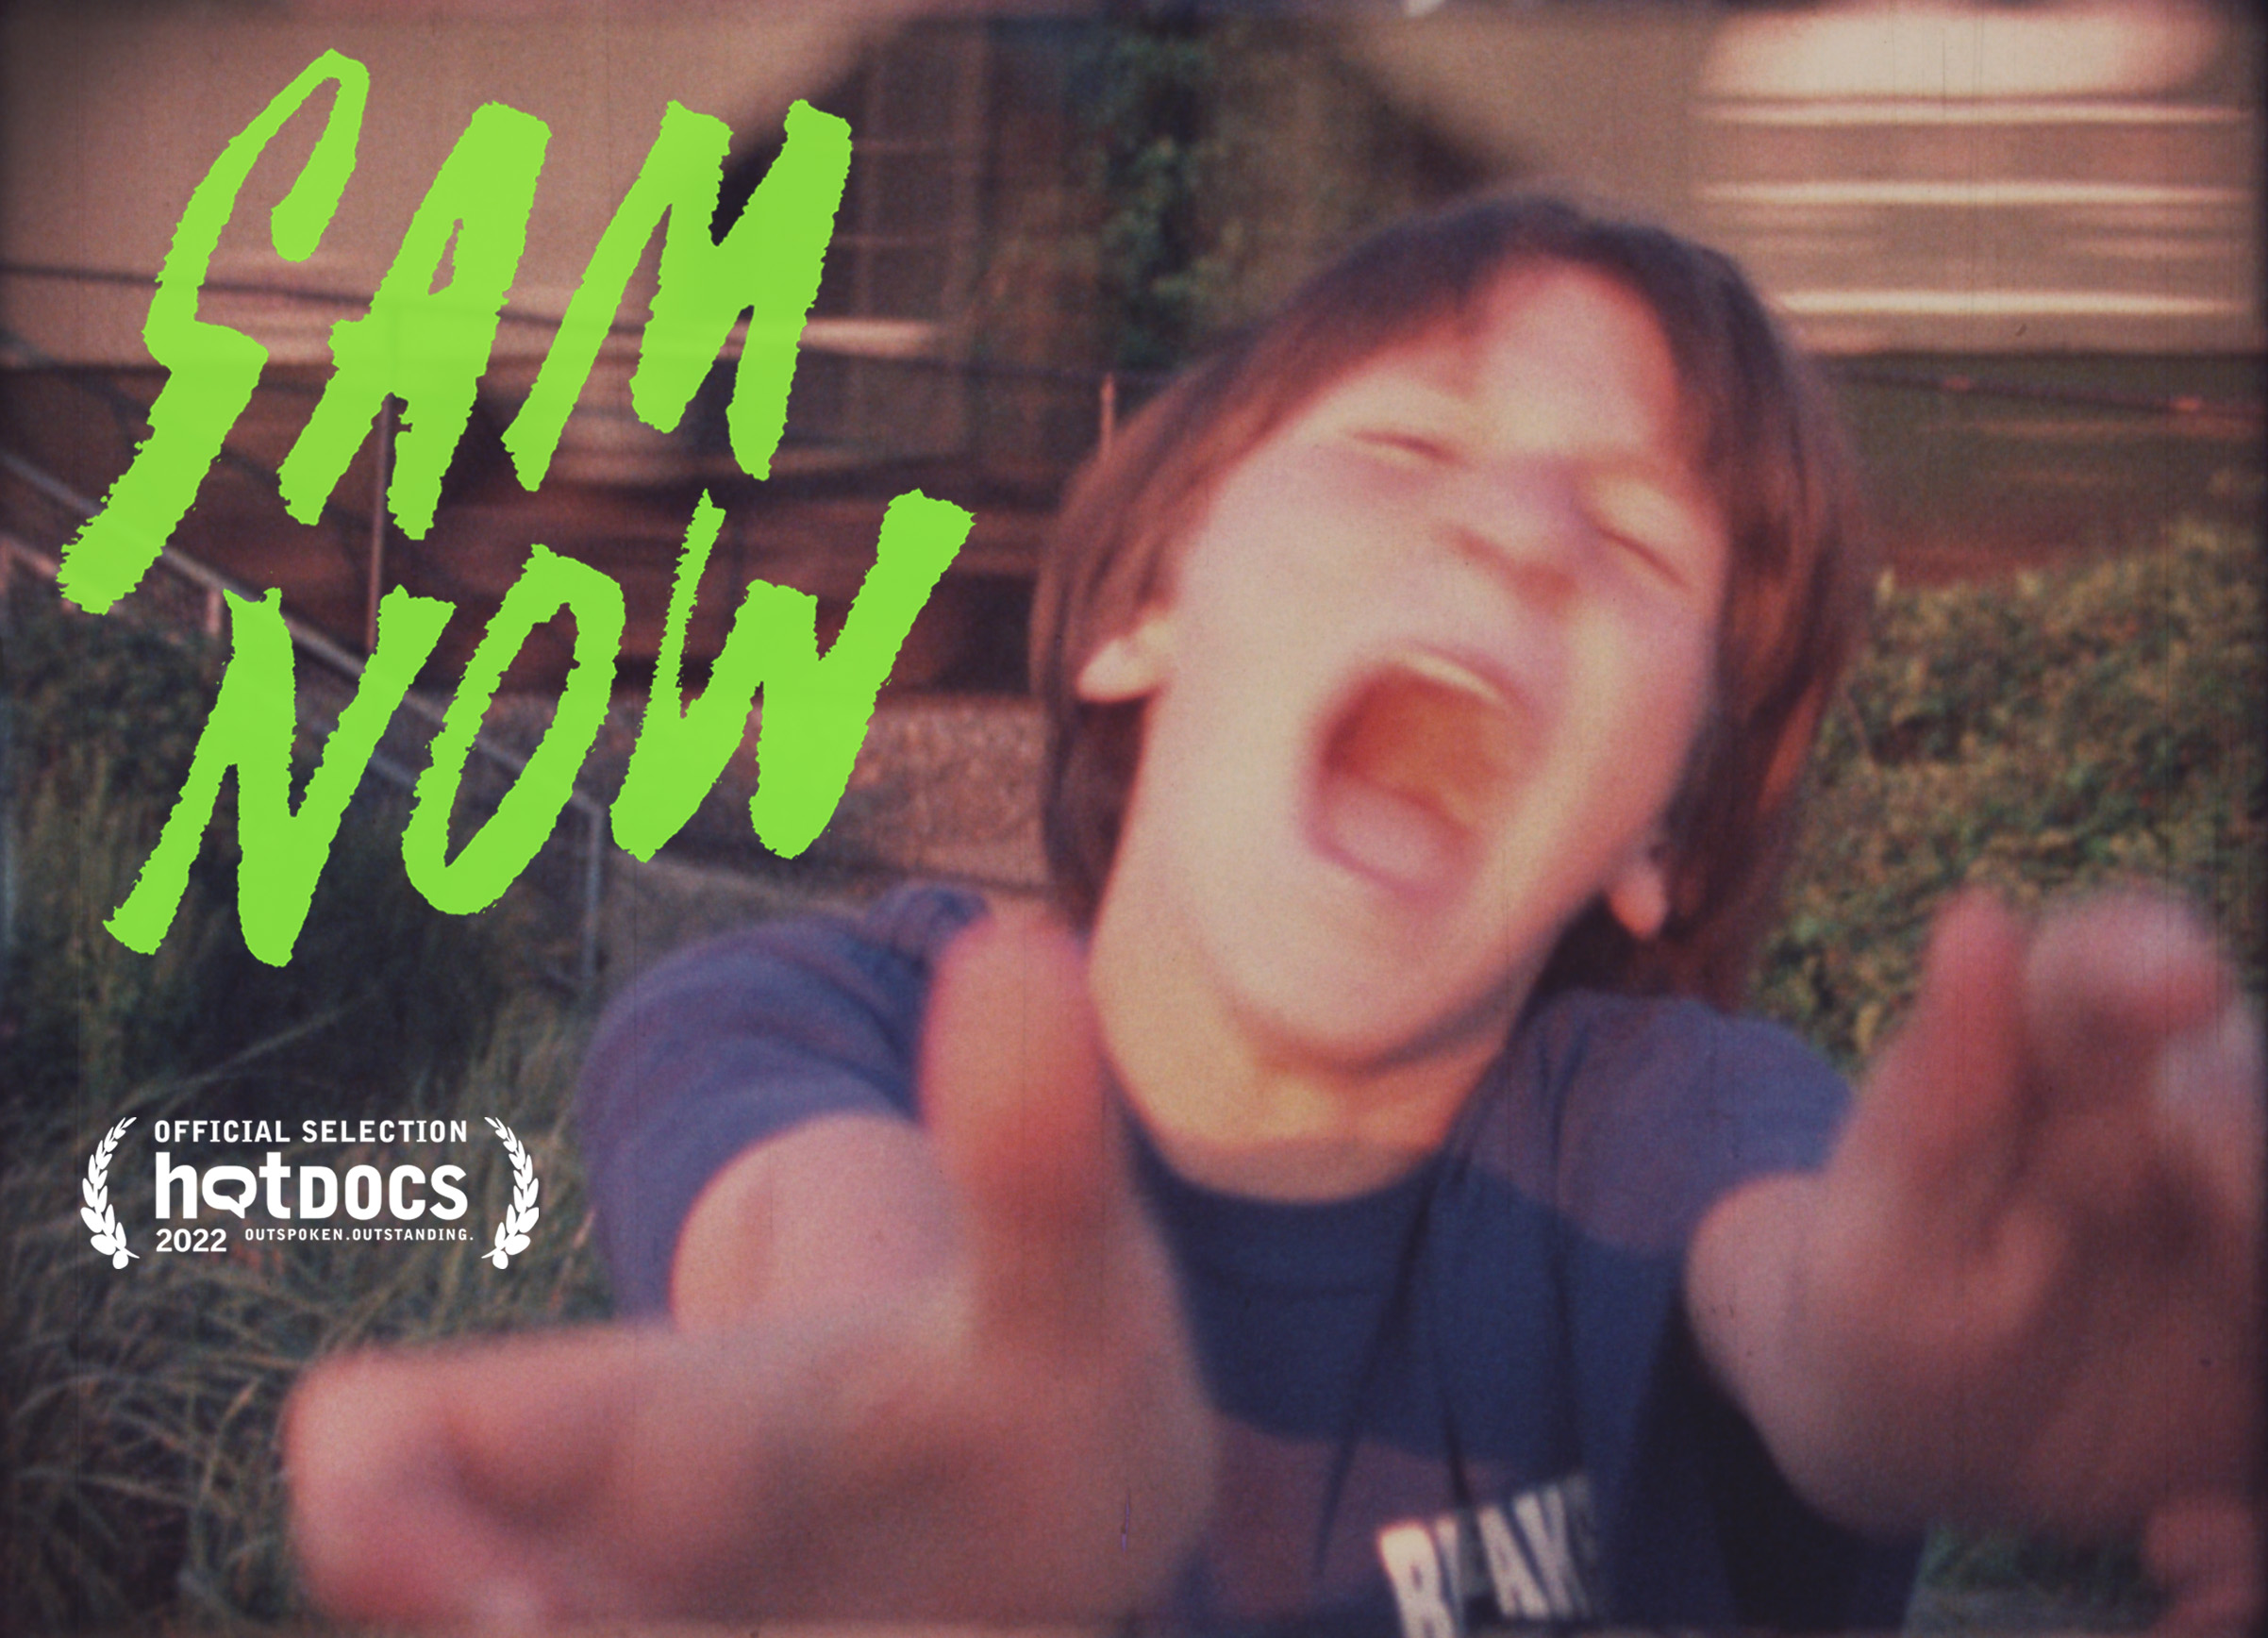 HOT DOCS 2022 – World premiere of ‘SAM NOW’ powerful documentary feature from director REED HARKNESS in INTERNATIONAL SPECTRUM SECTION